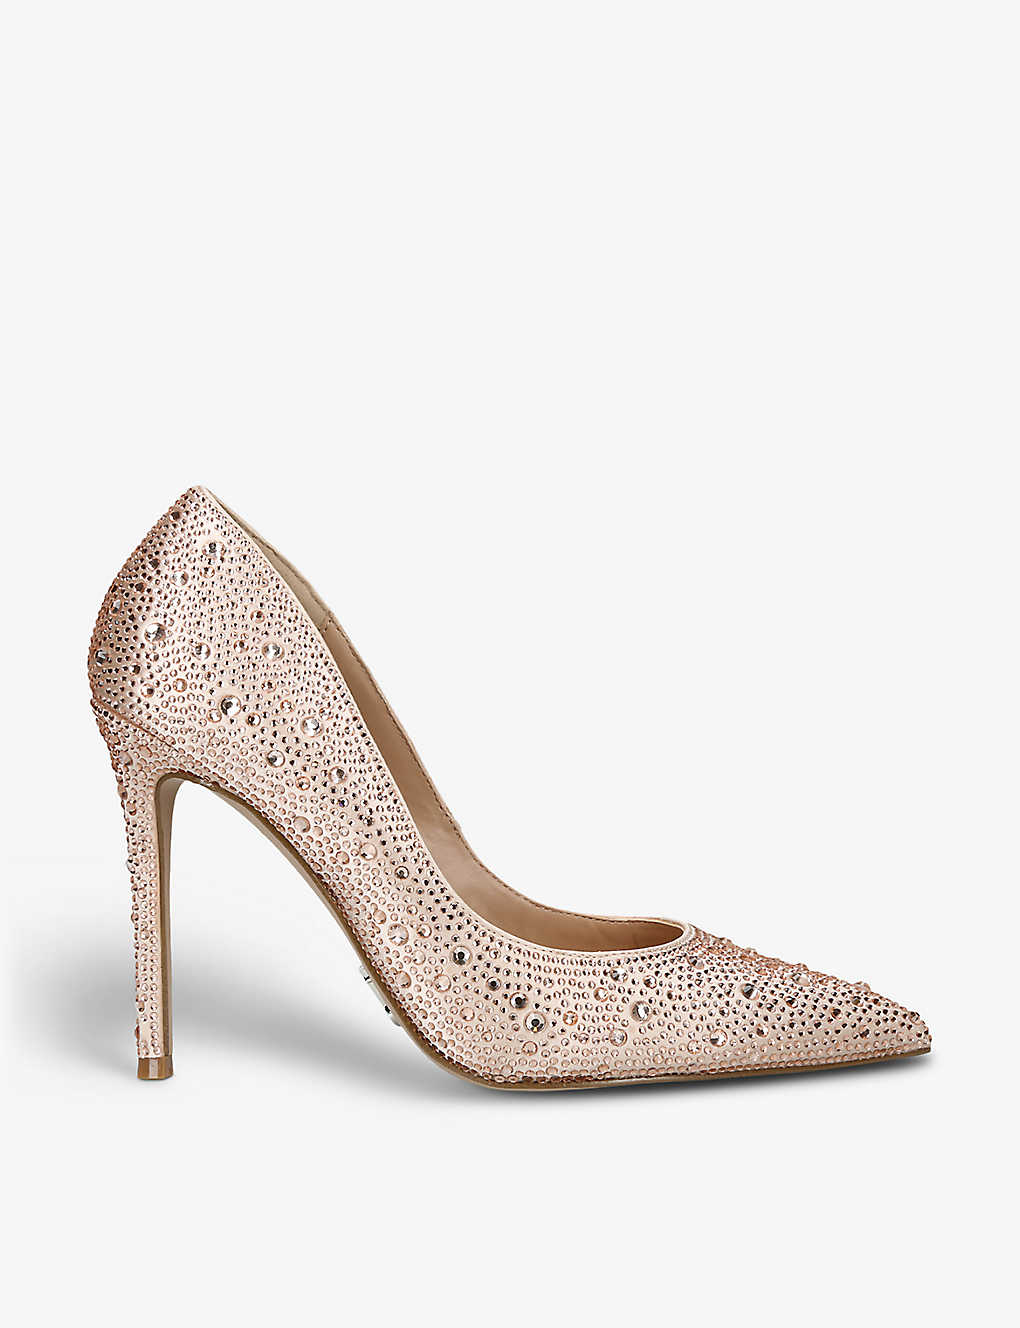 Steve Madden Womens Champagne Evelyn Rhinestone-embellished Woven Heeled Court Shoes